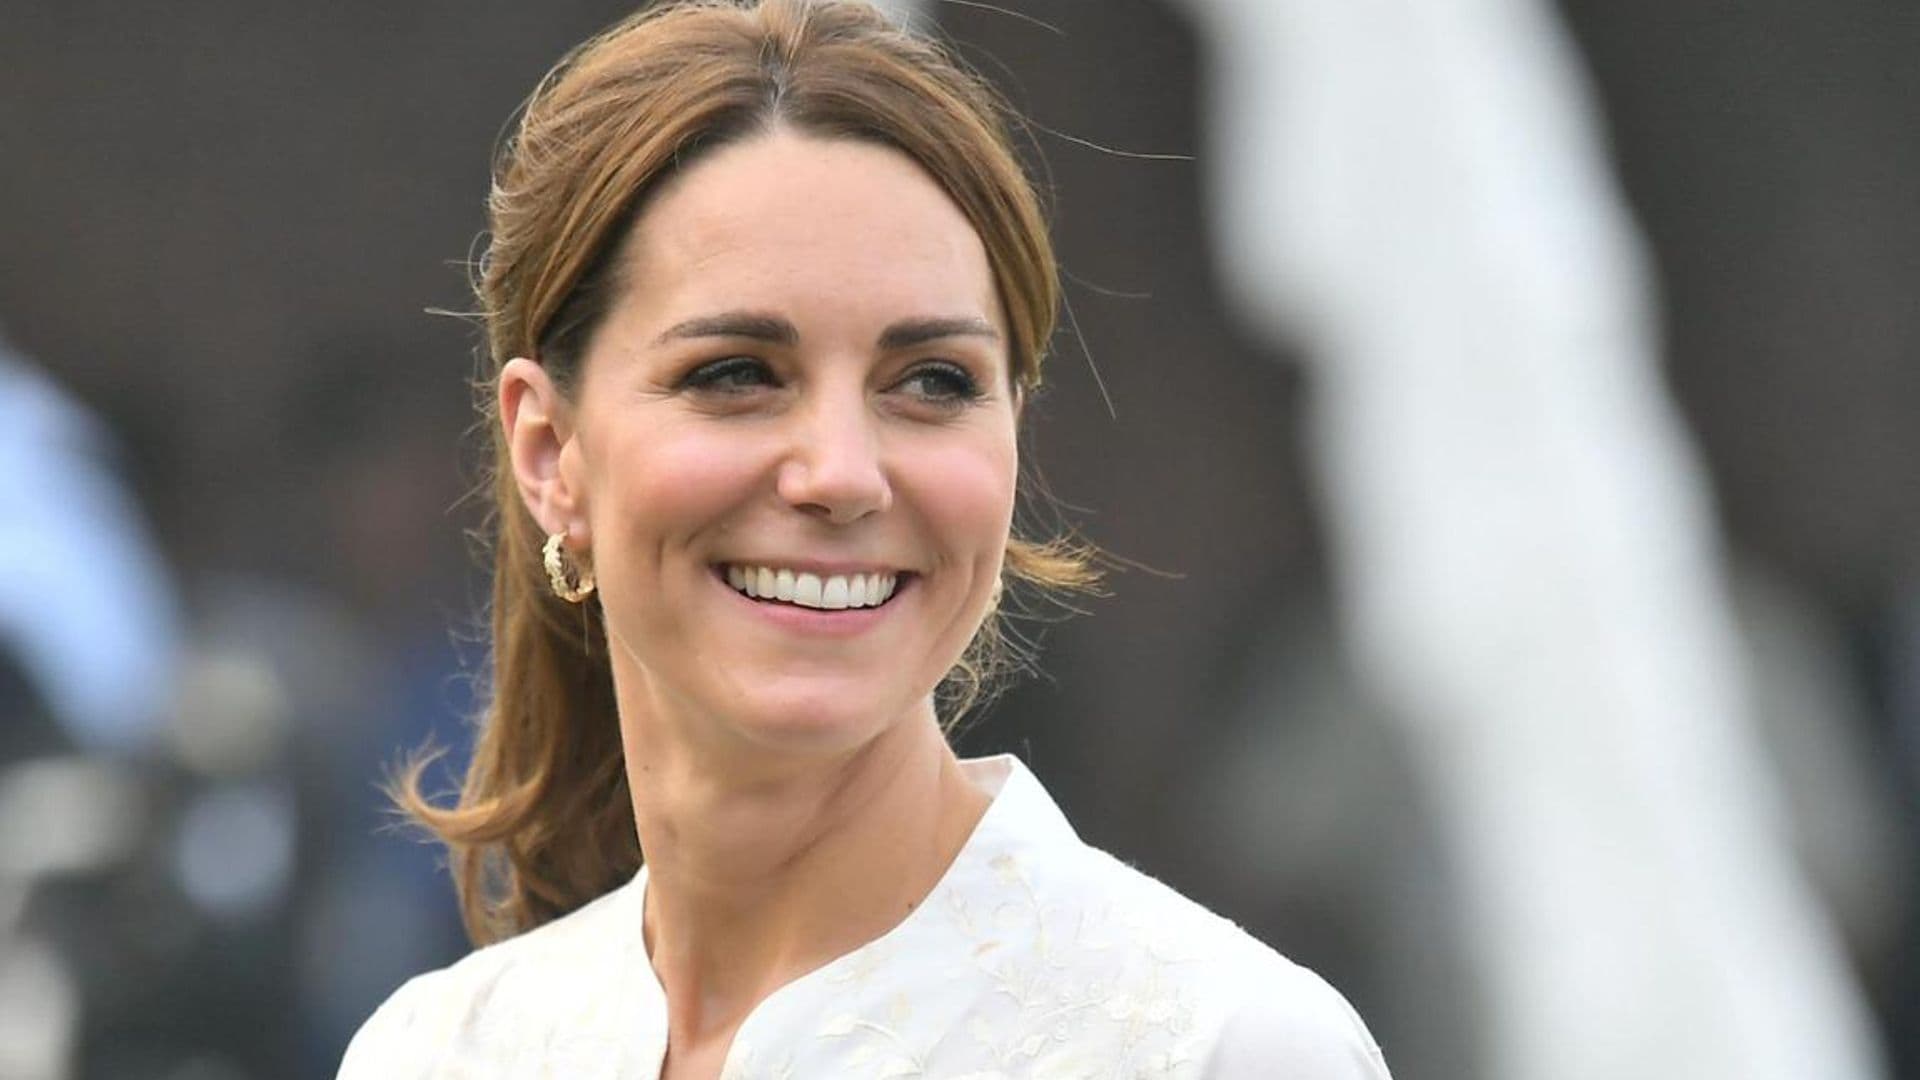 New video gives rare inside look at Kate Middleton's childhood home